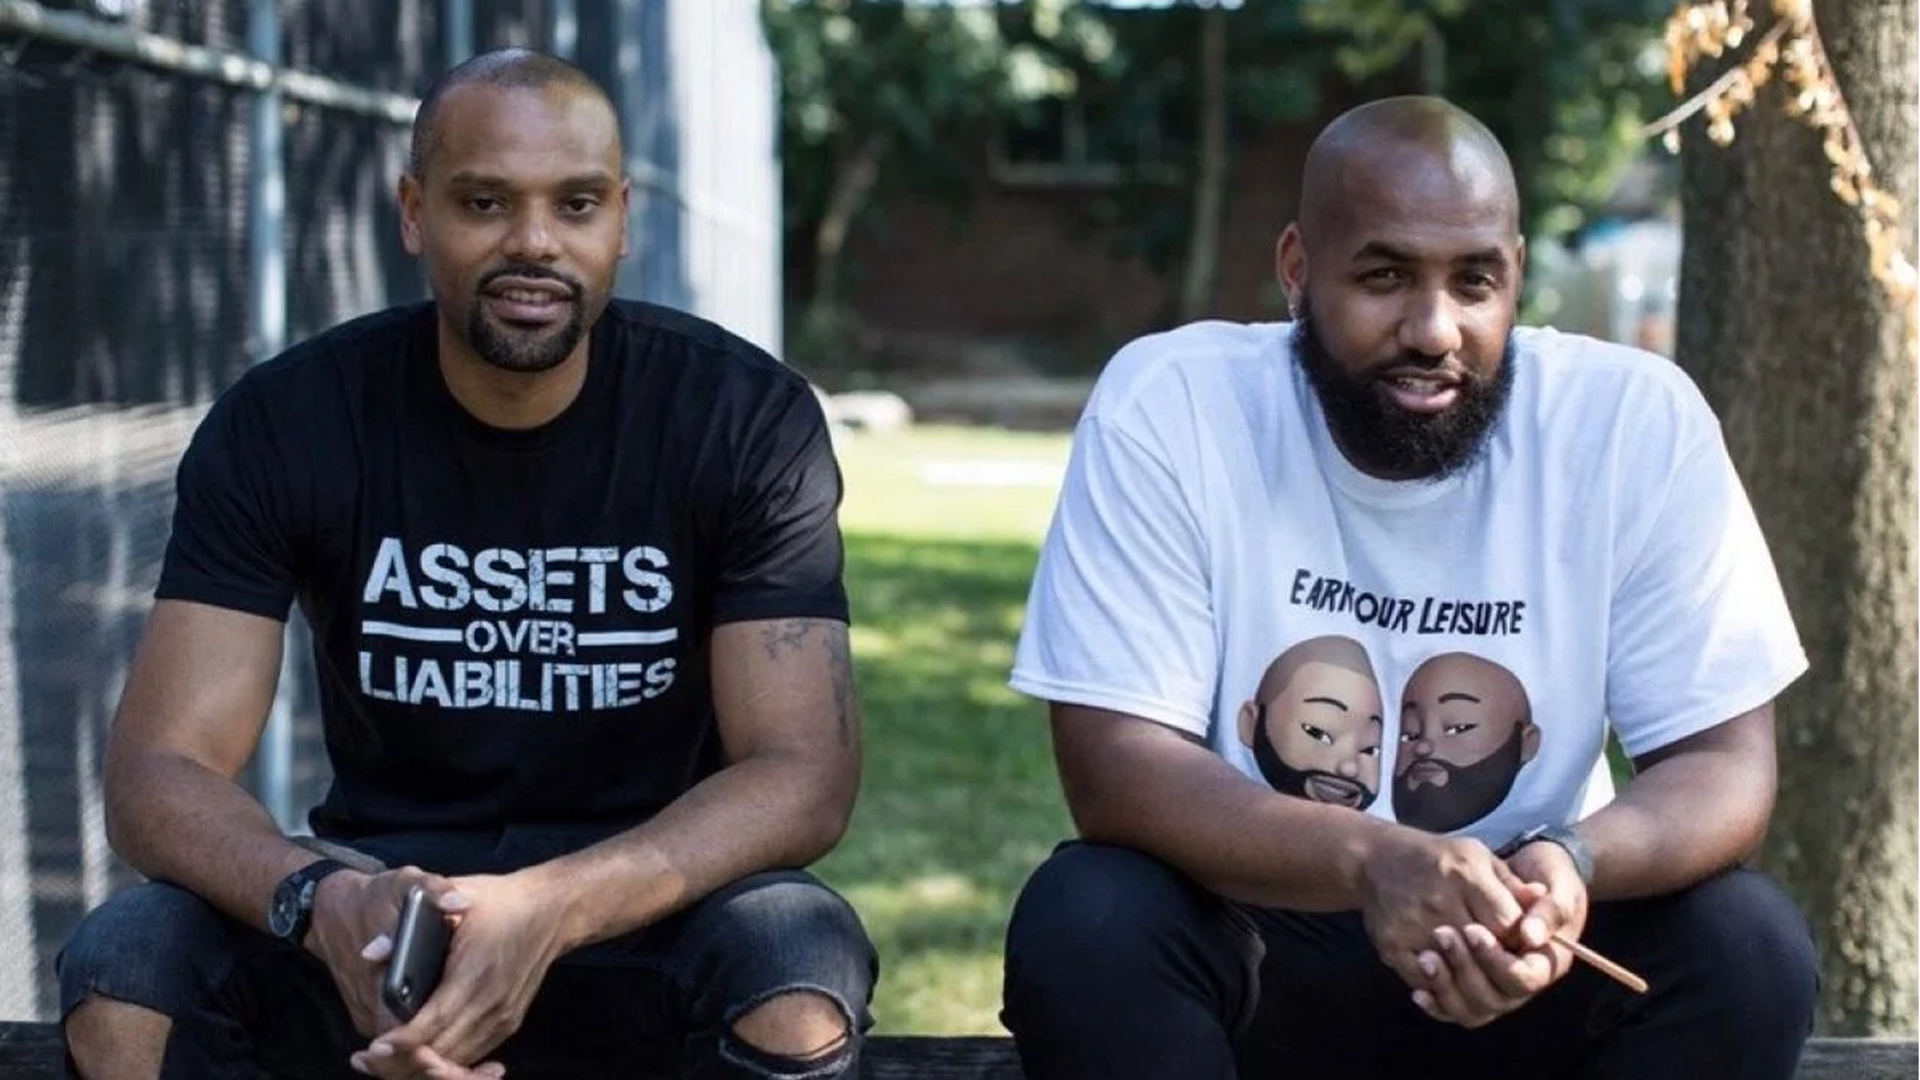 Earn Your Leisure's Rashad Bilal And Troy Millings Wants The Black Community To Put Assets Over Liabilities